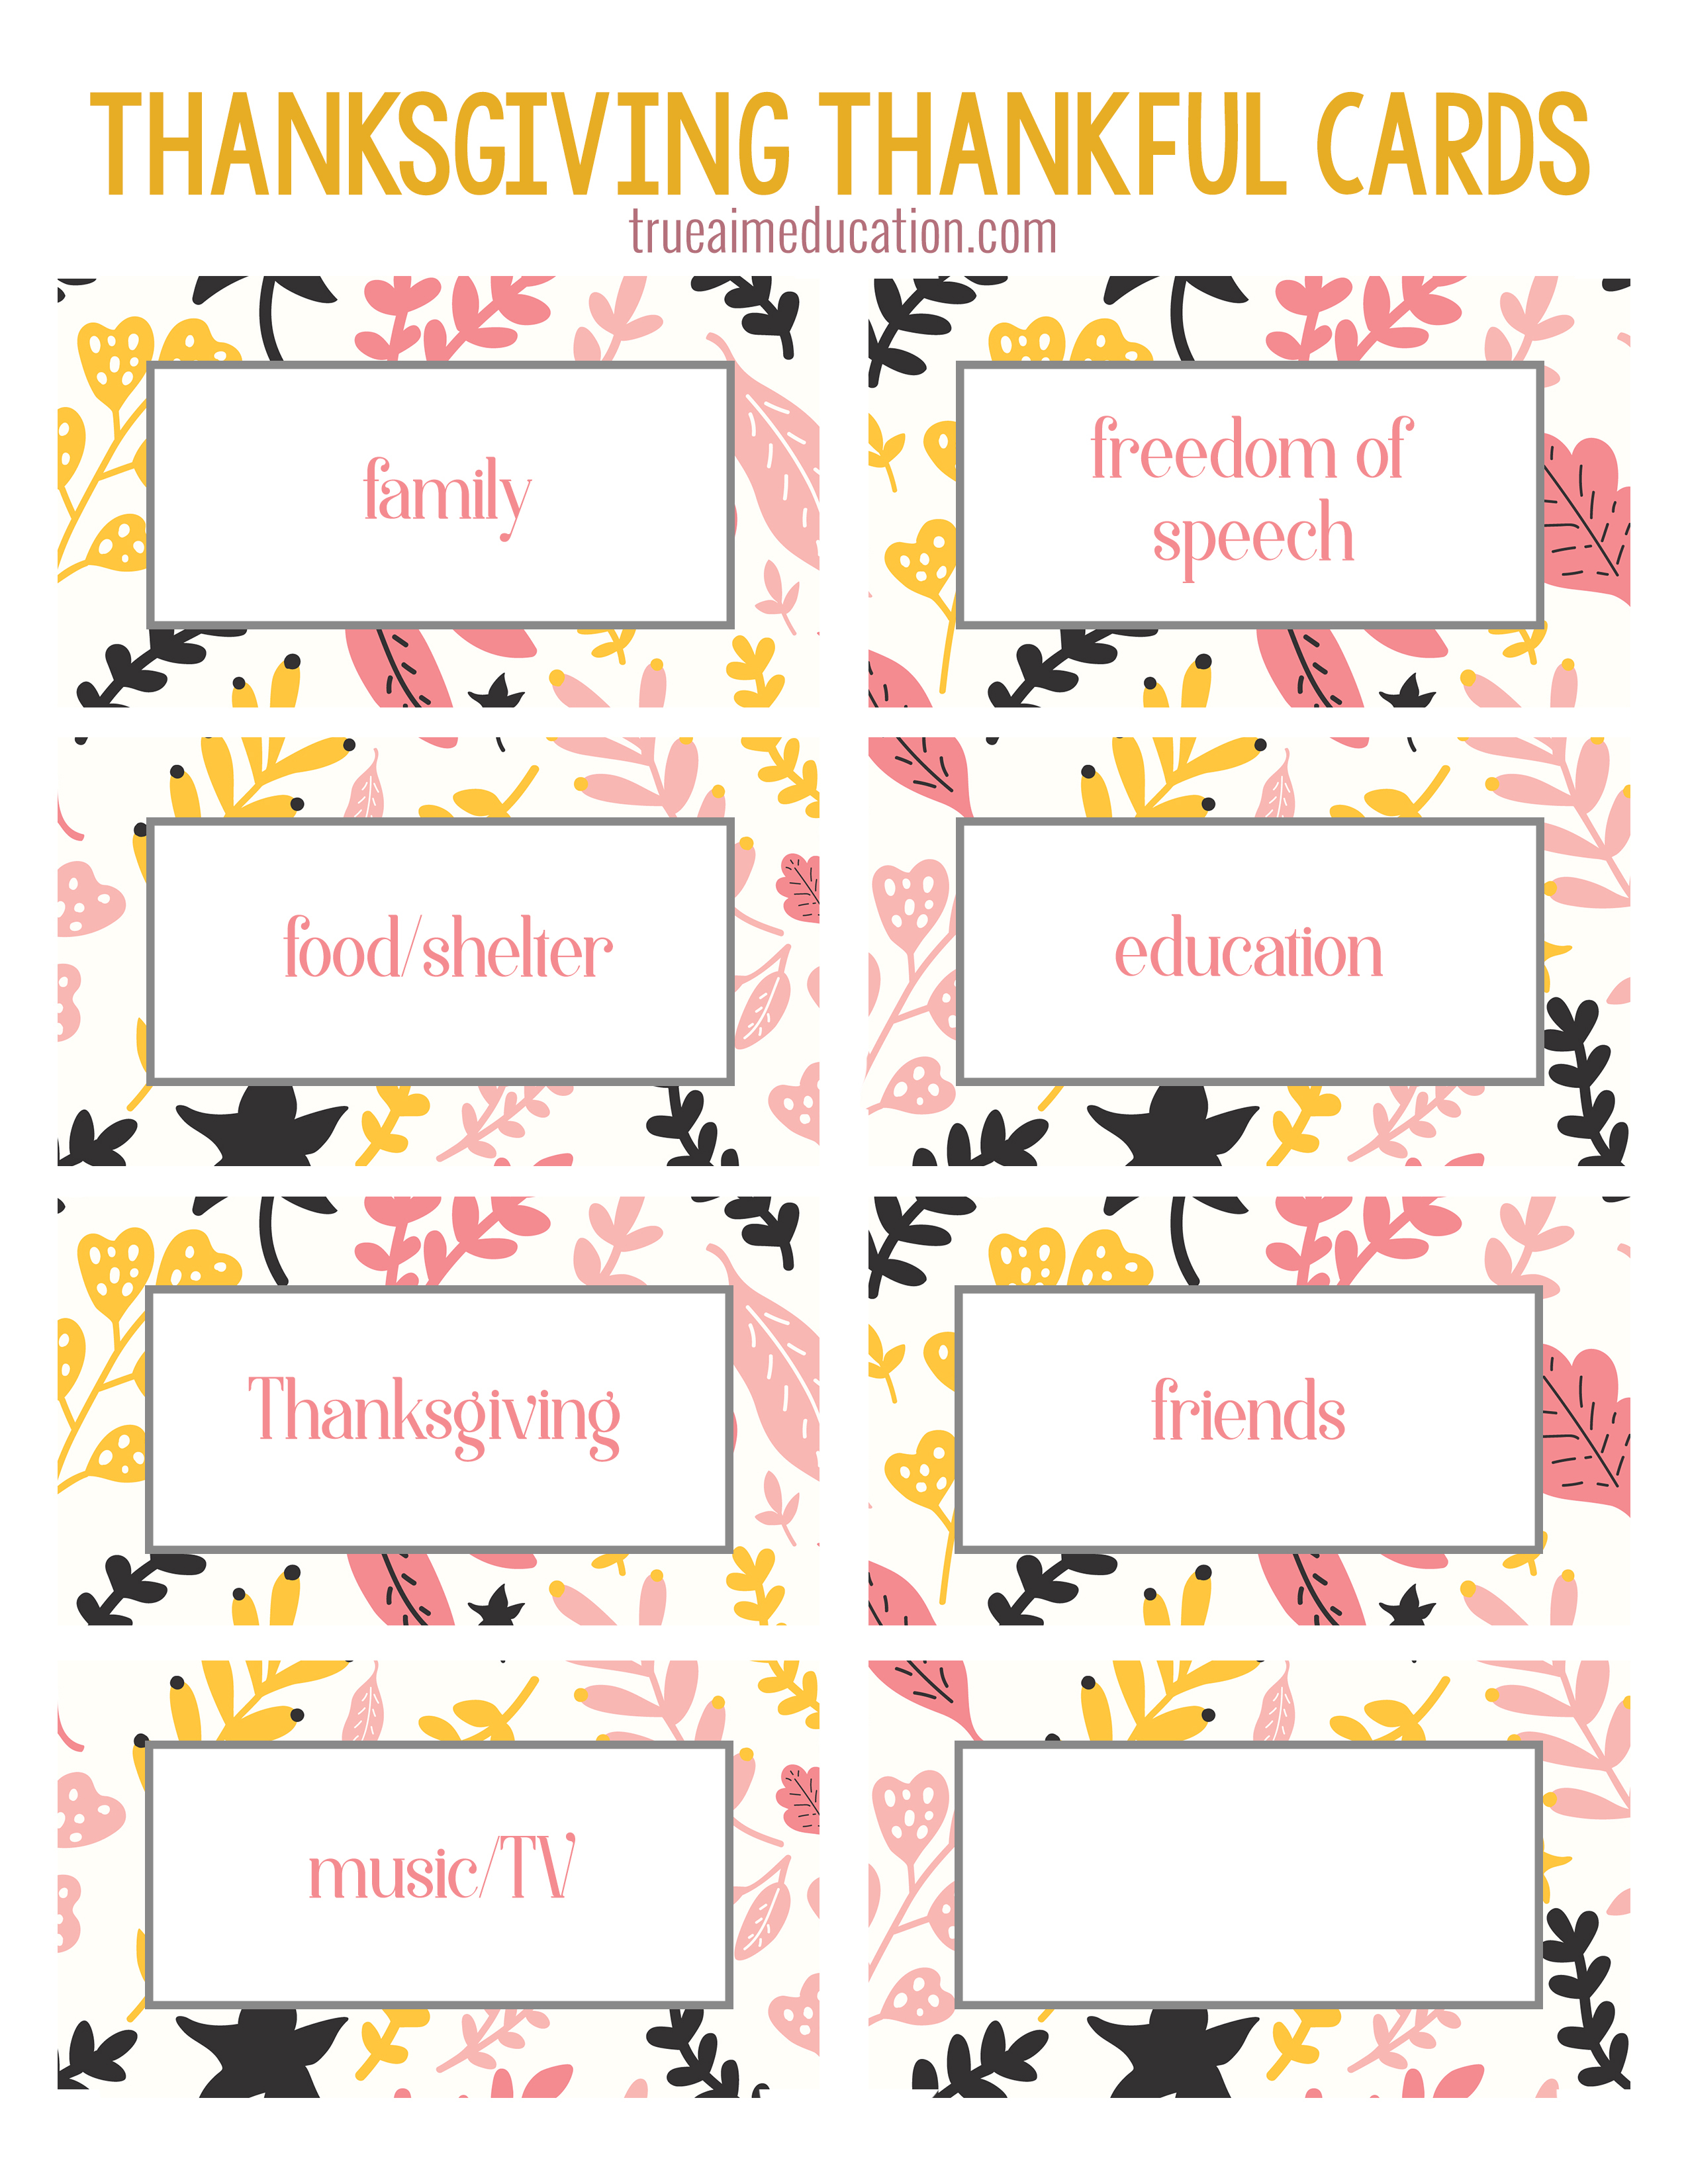 Thanksgiving Thankfulness With Free Printable Cards - Free Printable Picture Cards